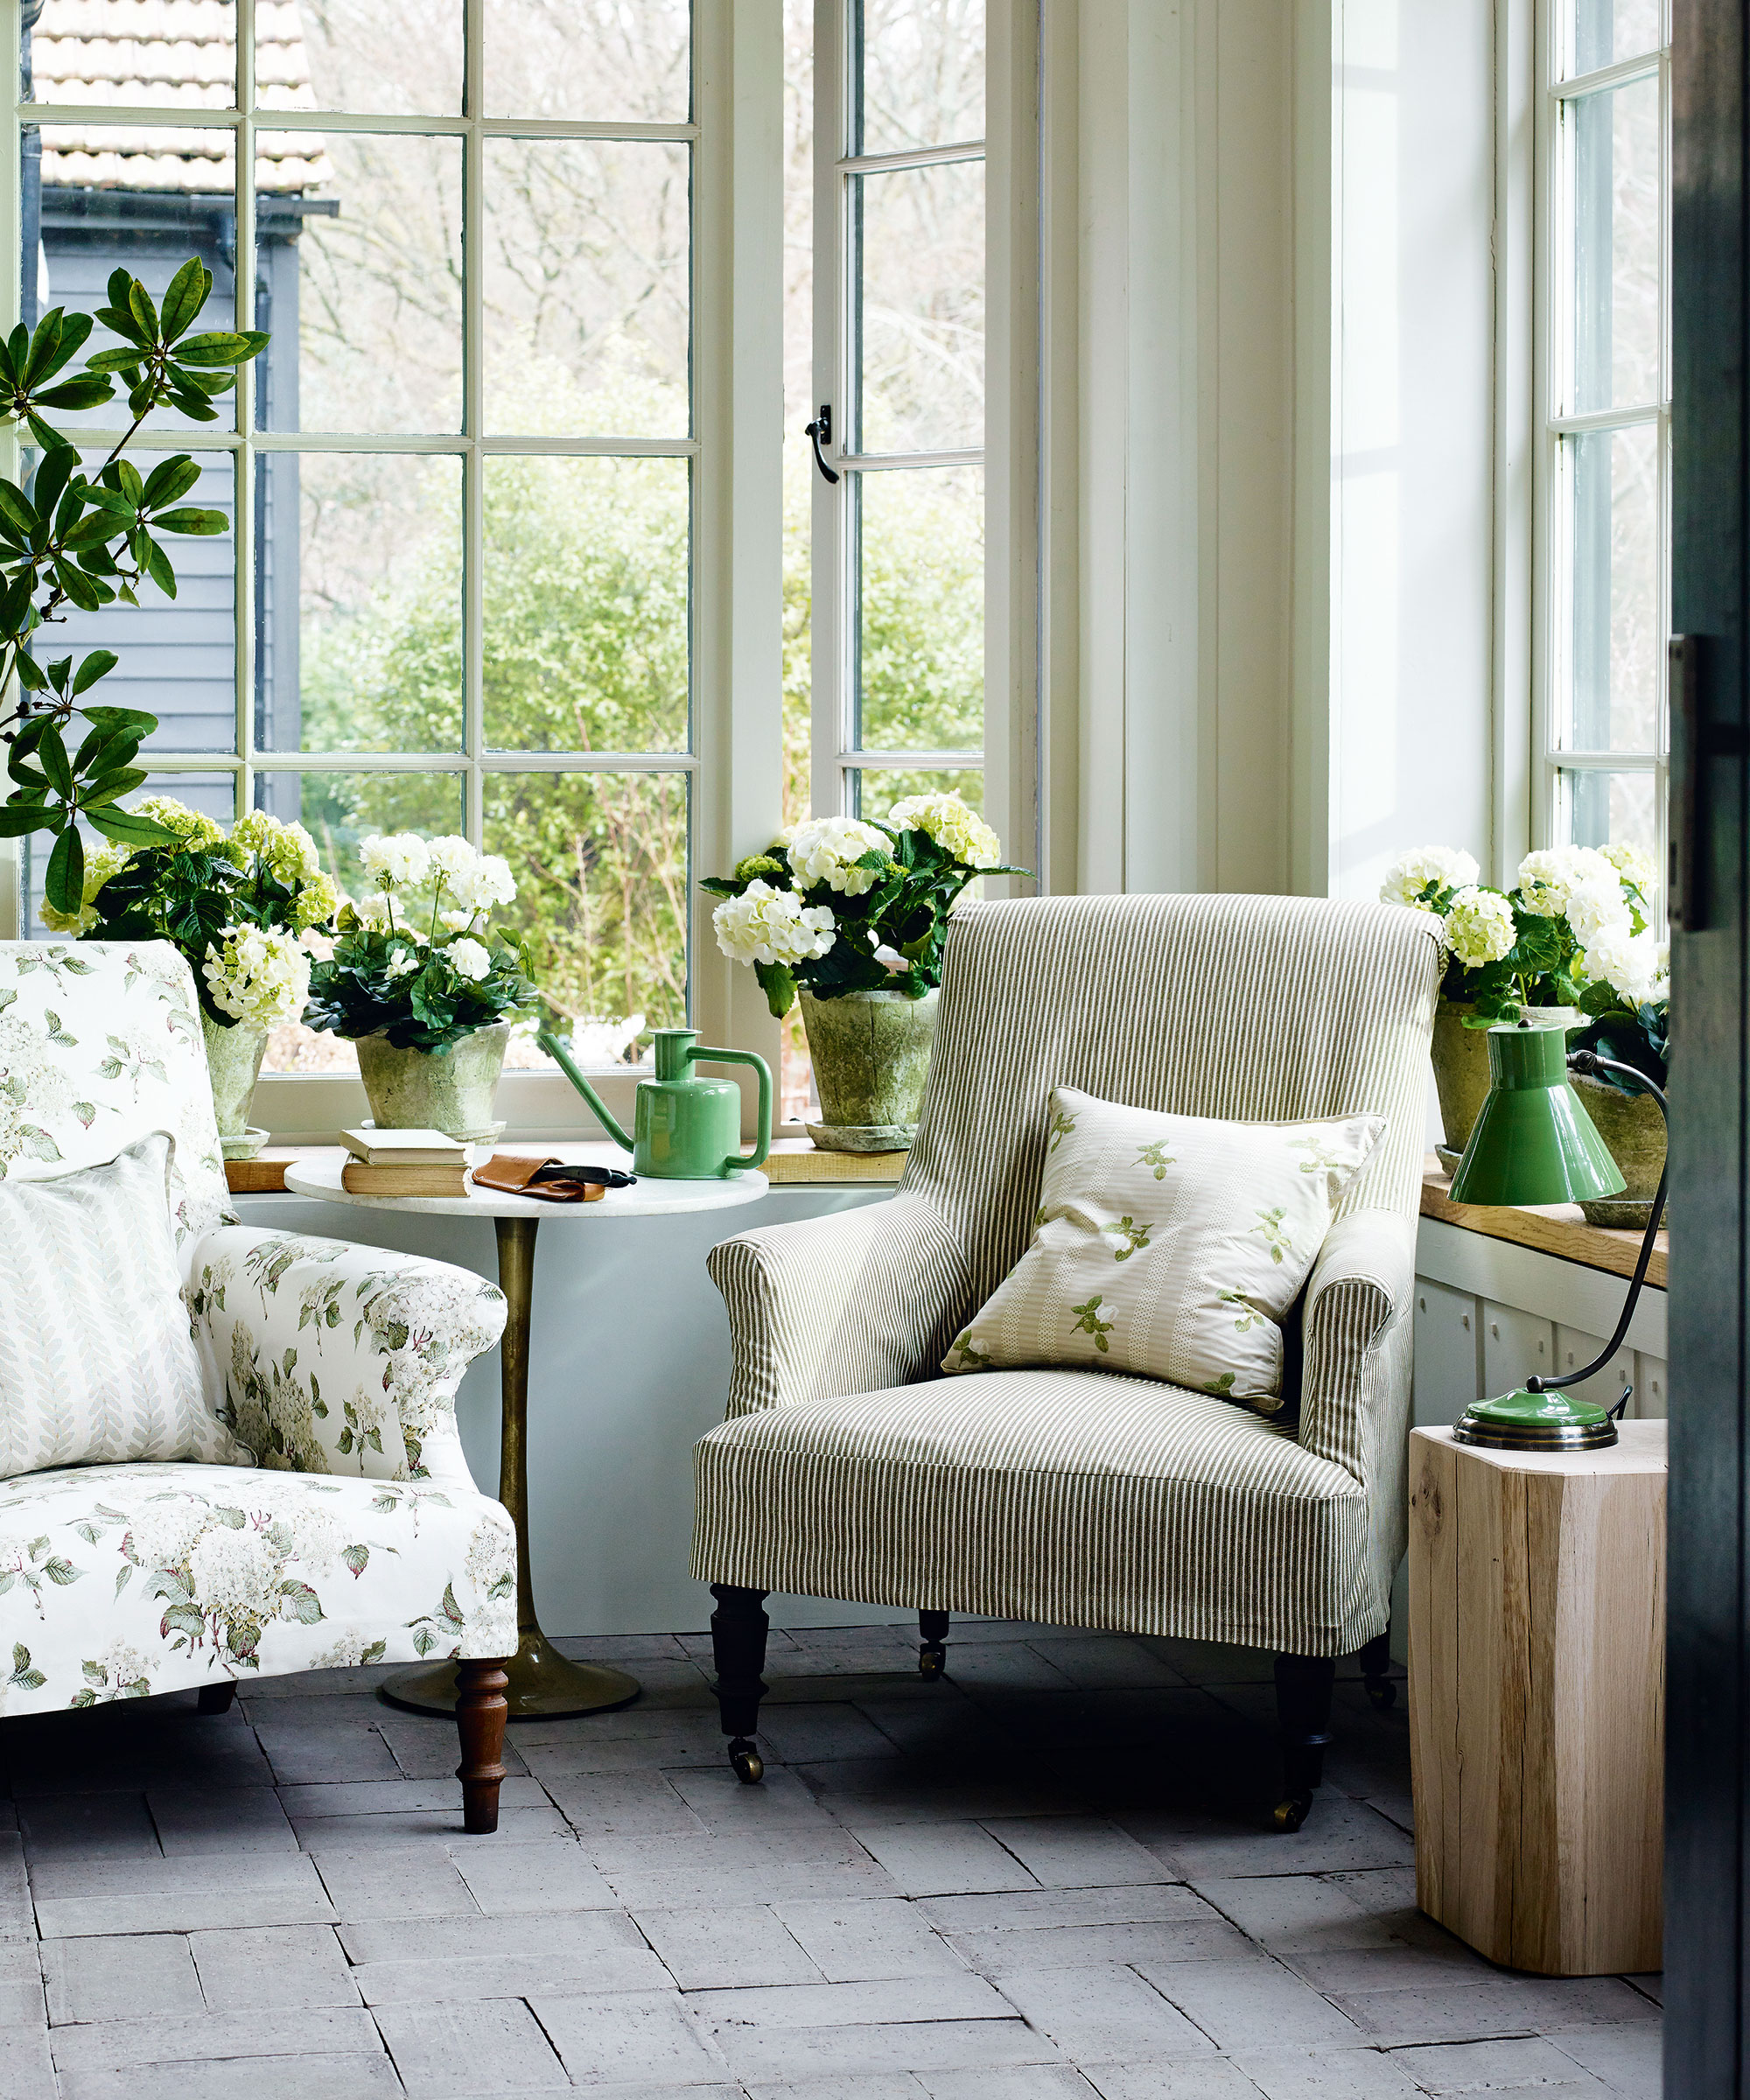 Garden room ideas with country style decor, two armchairs, stone flooring, plants and flowers on windowsill